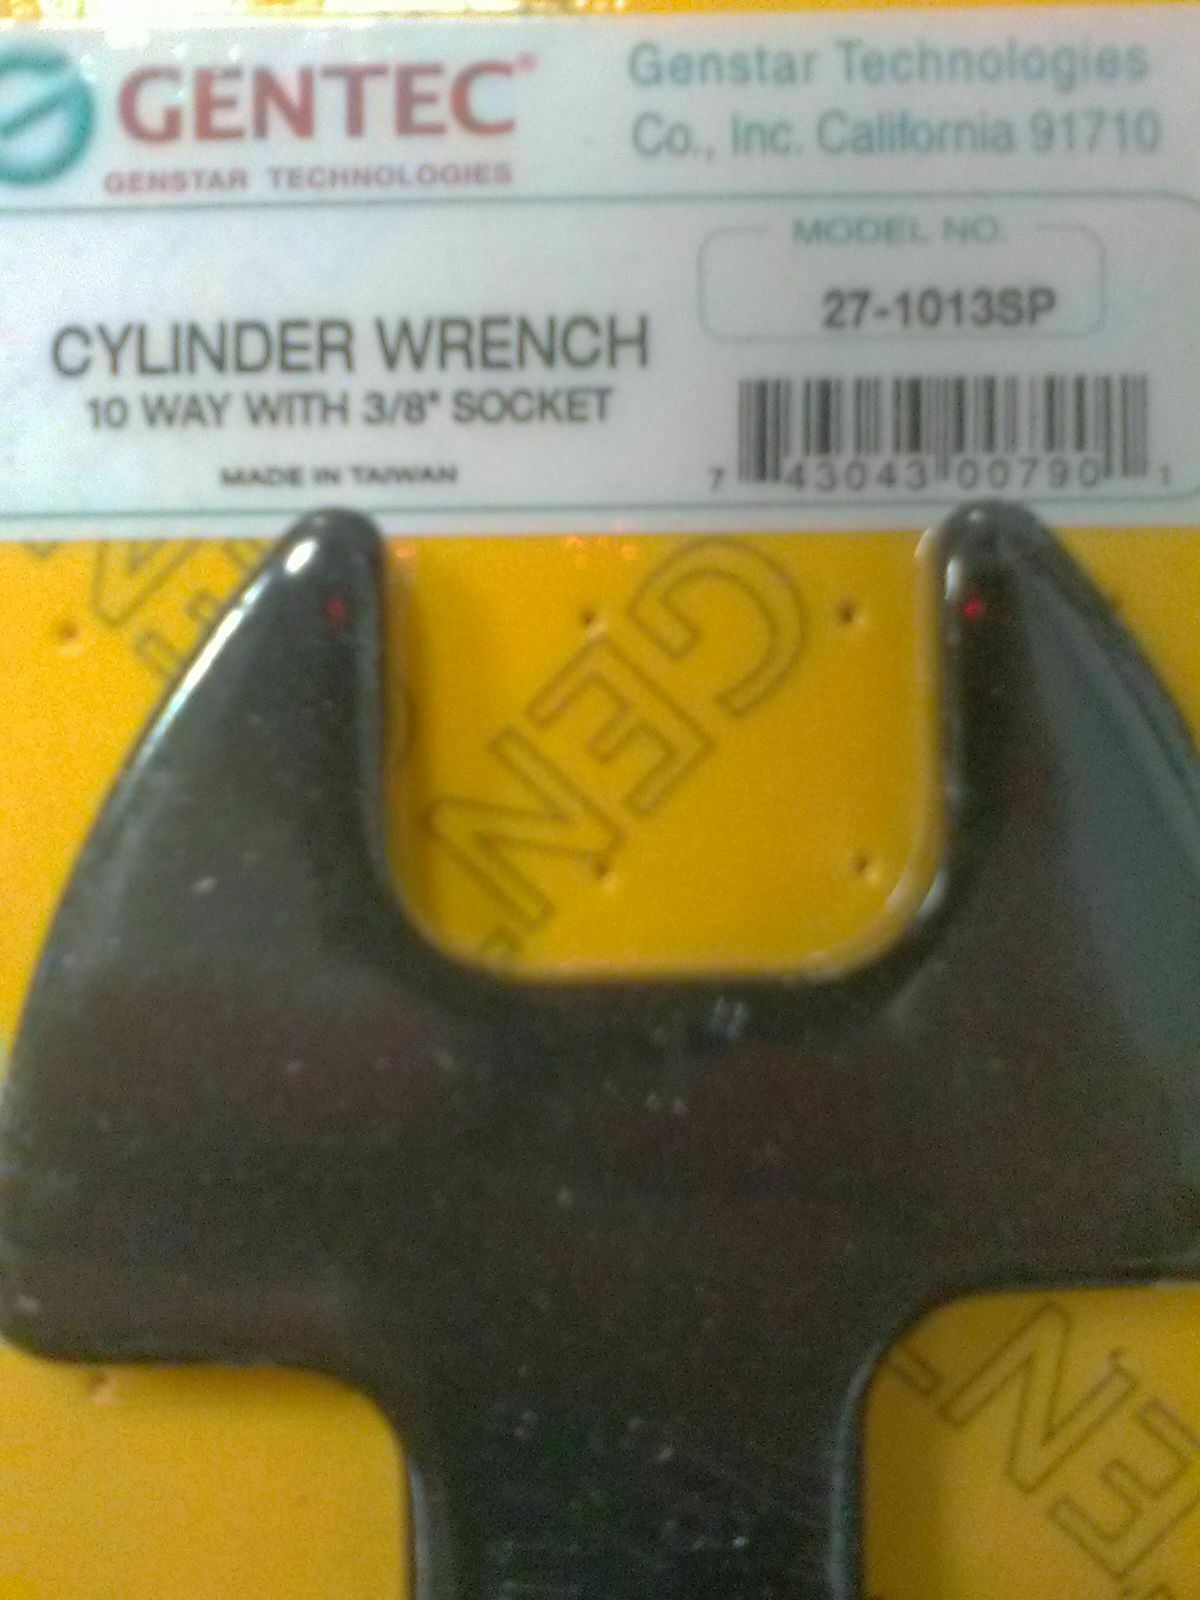 Gentec Cylinder Wrench 10 Way With 3/8 Socket 27 - 1013SP - GentecGentec Cylinder Wrench 10 Way With 3/8 Socket 27 - 1